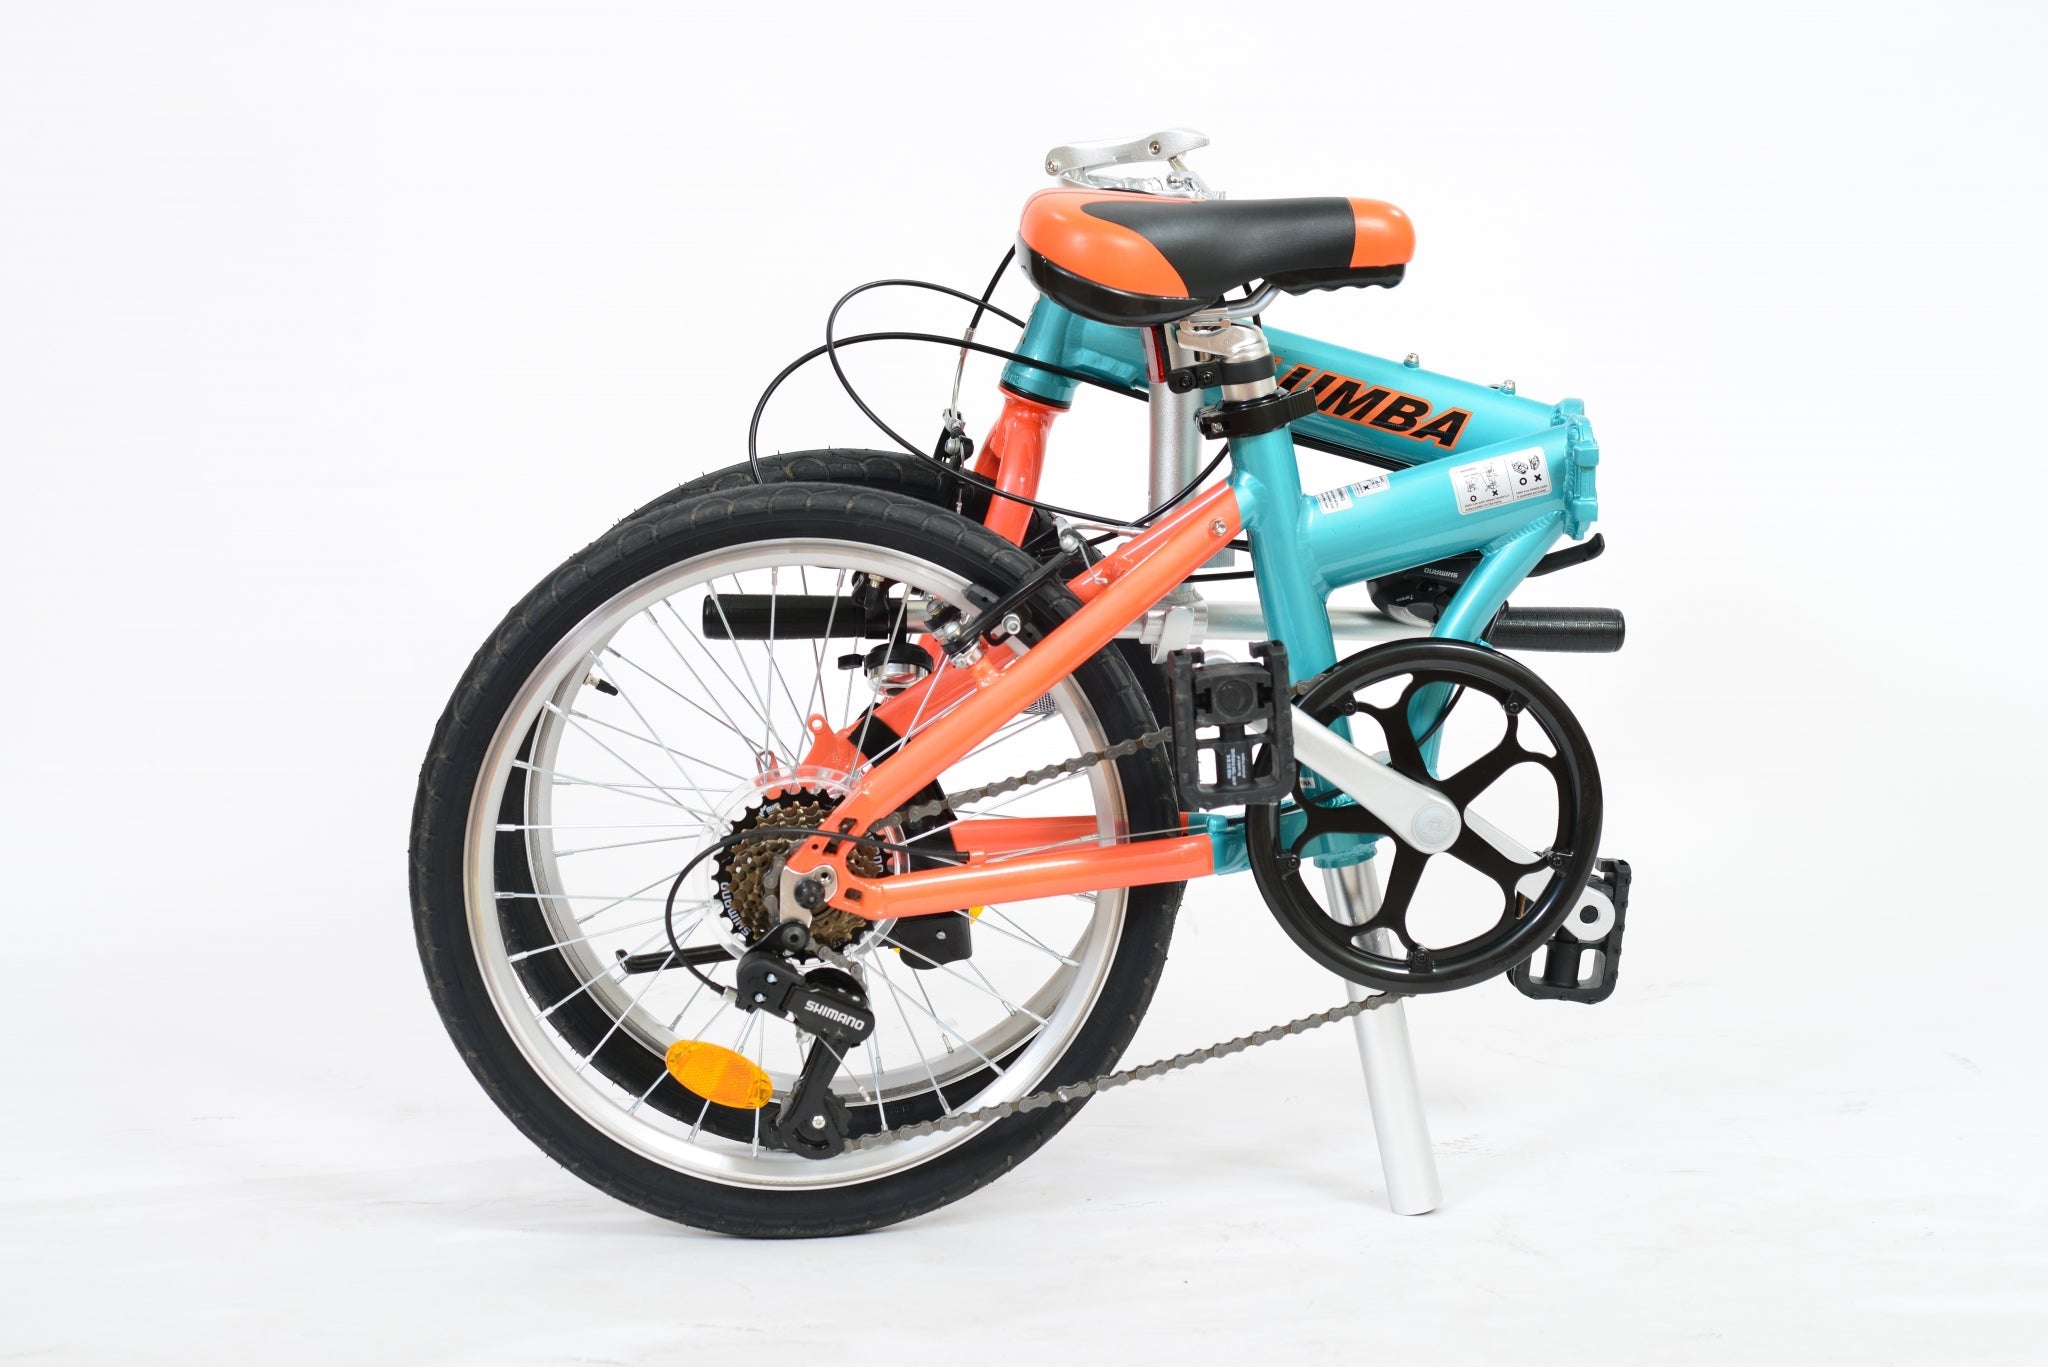 Folded position of an orange and blue folding bicycle.